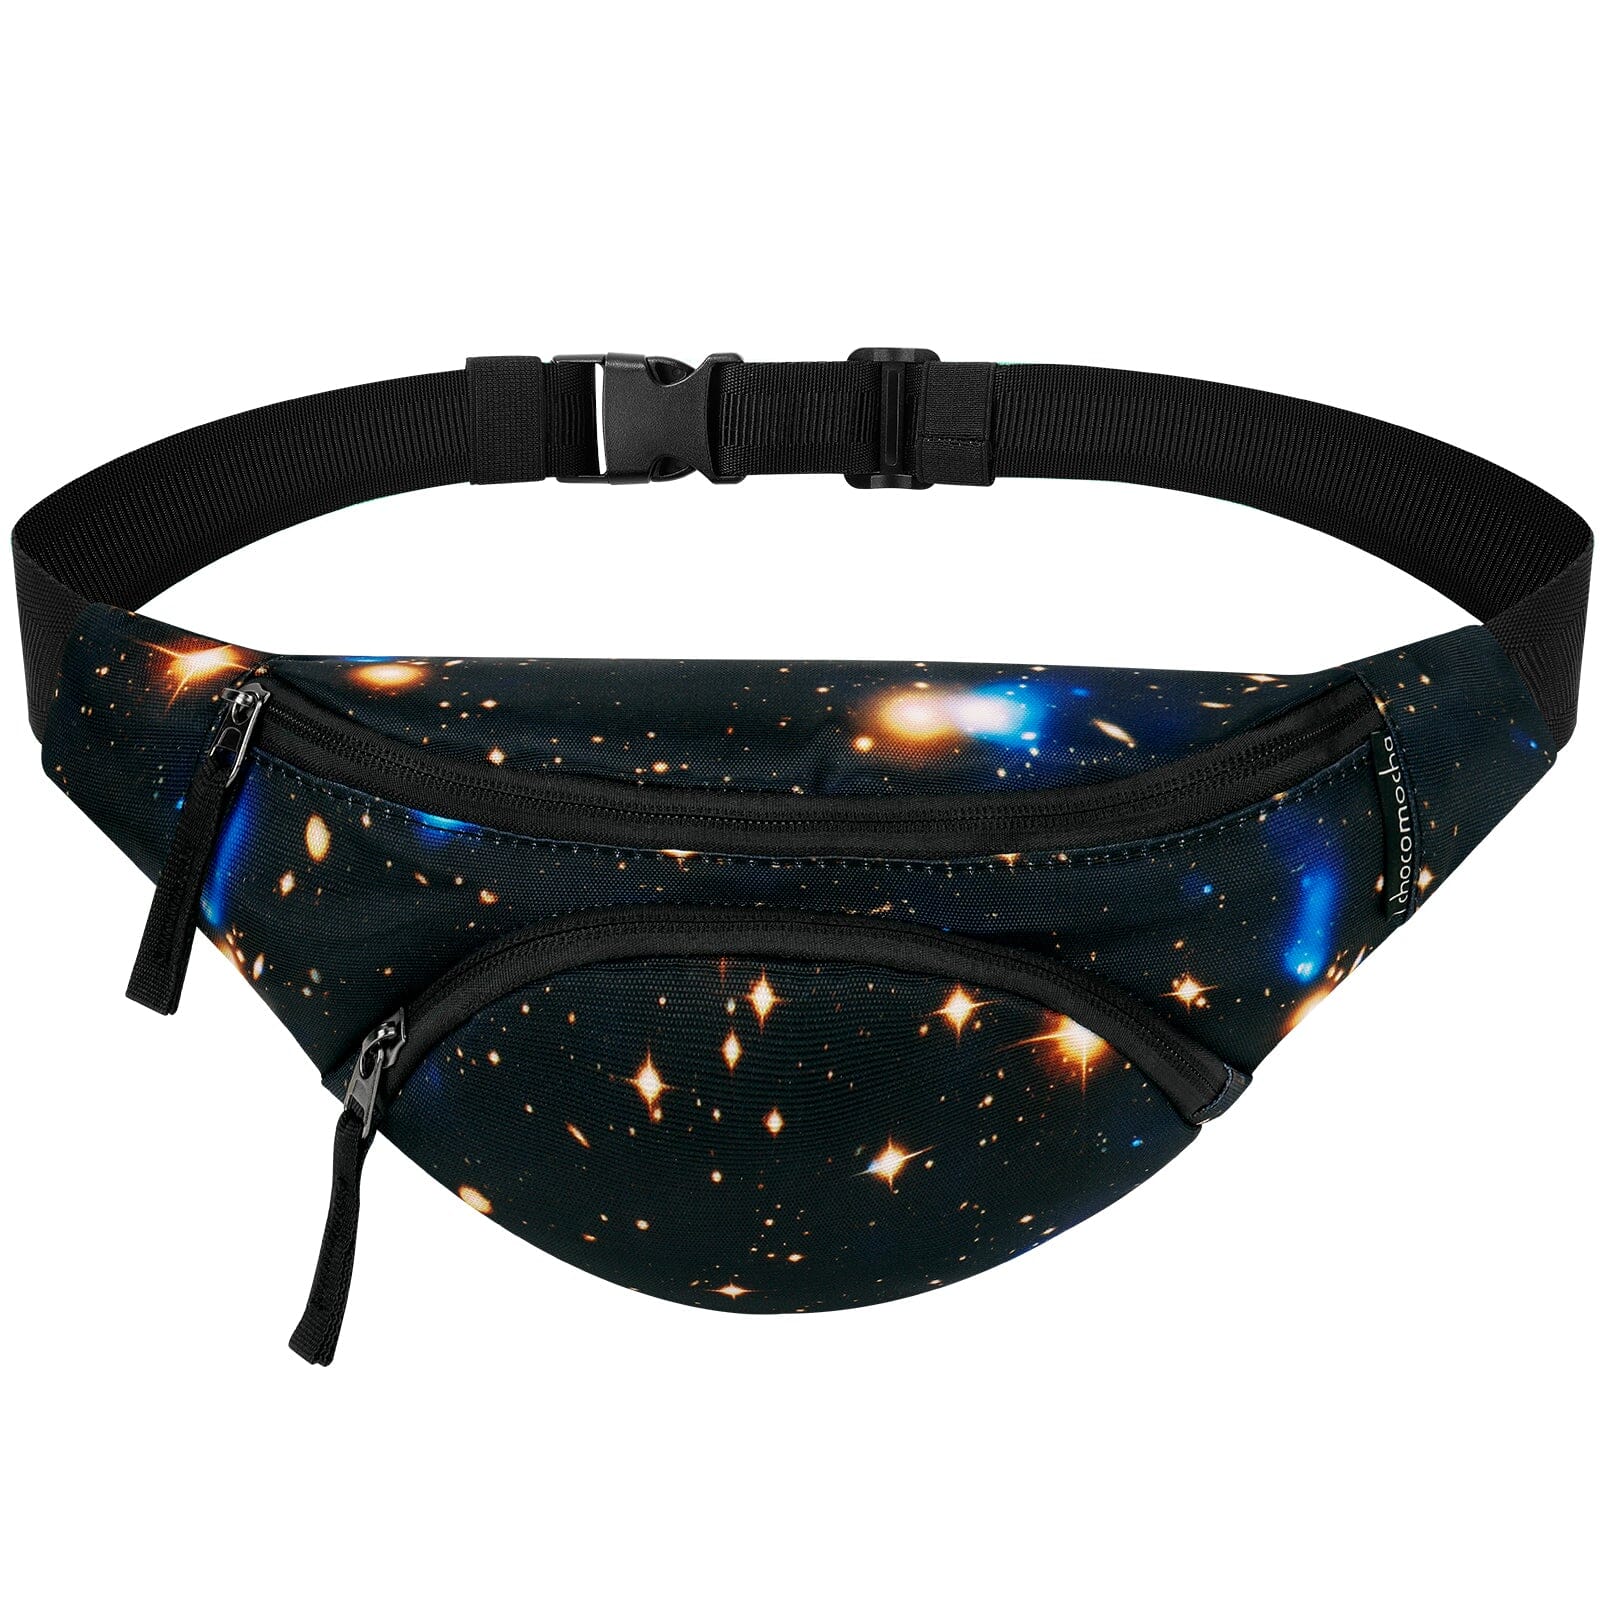 Choco Mocha Galaxy Kids Fanny Pack for Toddler Boys, Children Size Black Waist Pack 11.8*5.5 inches fanny pack chocomochakids 